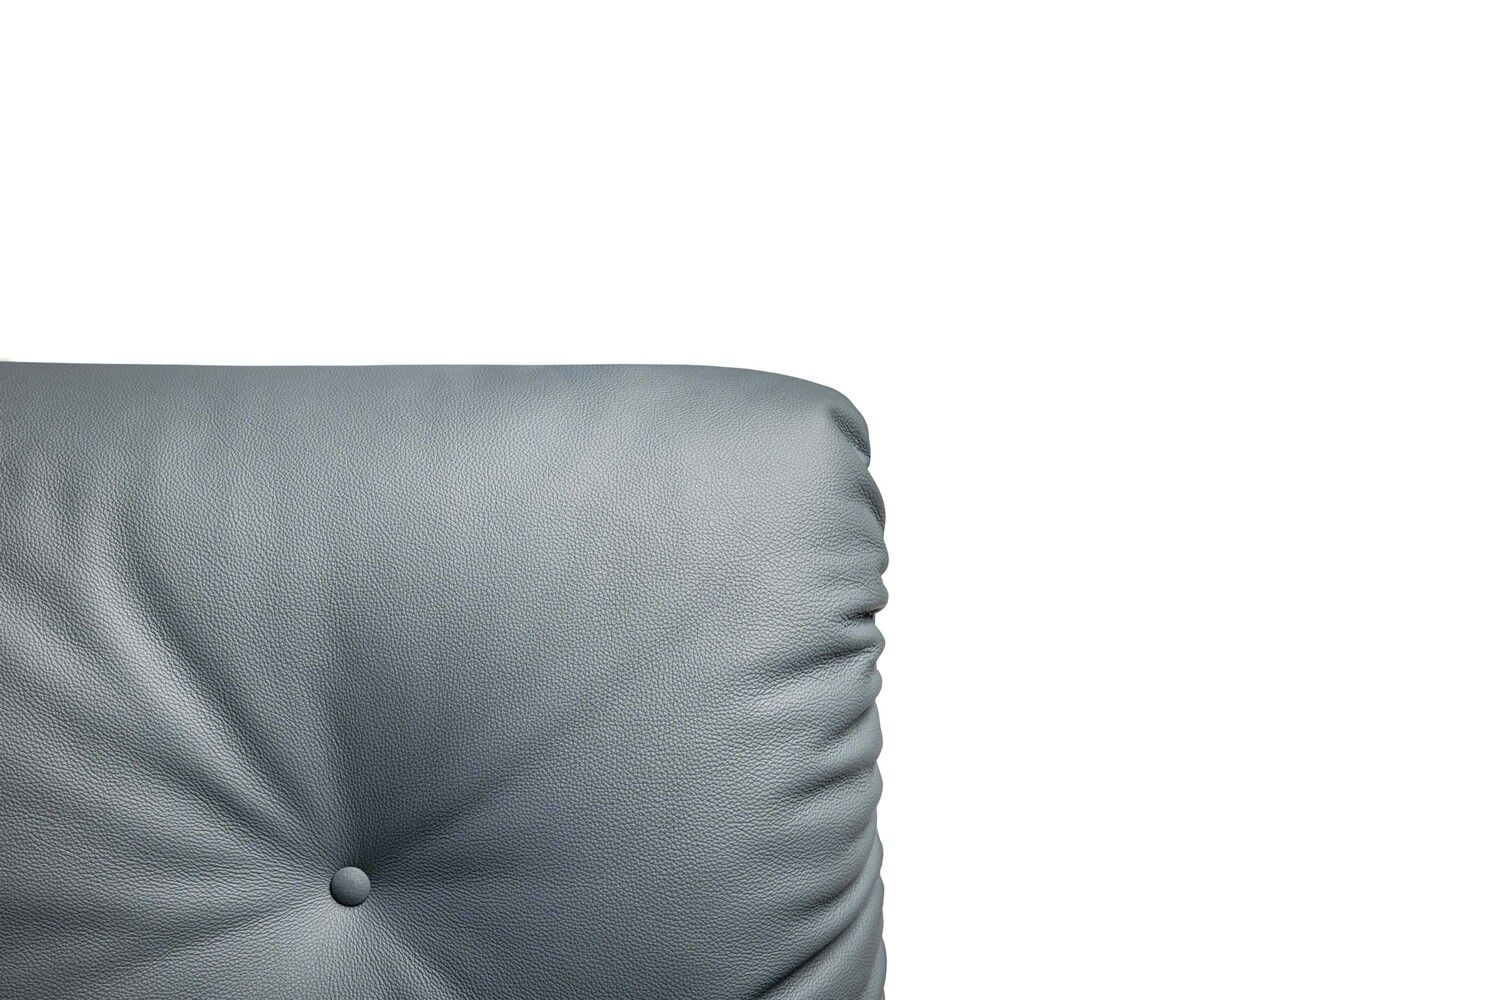 Overture is a lounge armchair designed by Pierluigi Cerri and offered by Peverelli